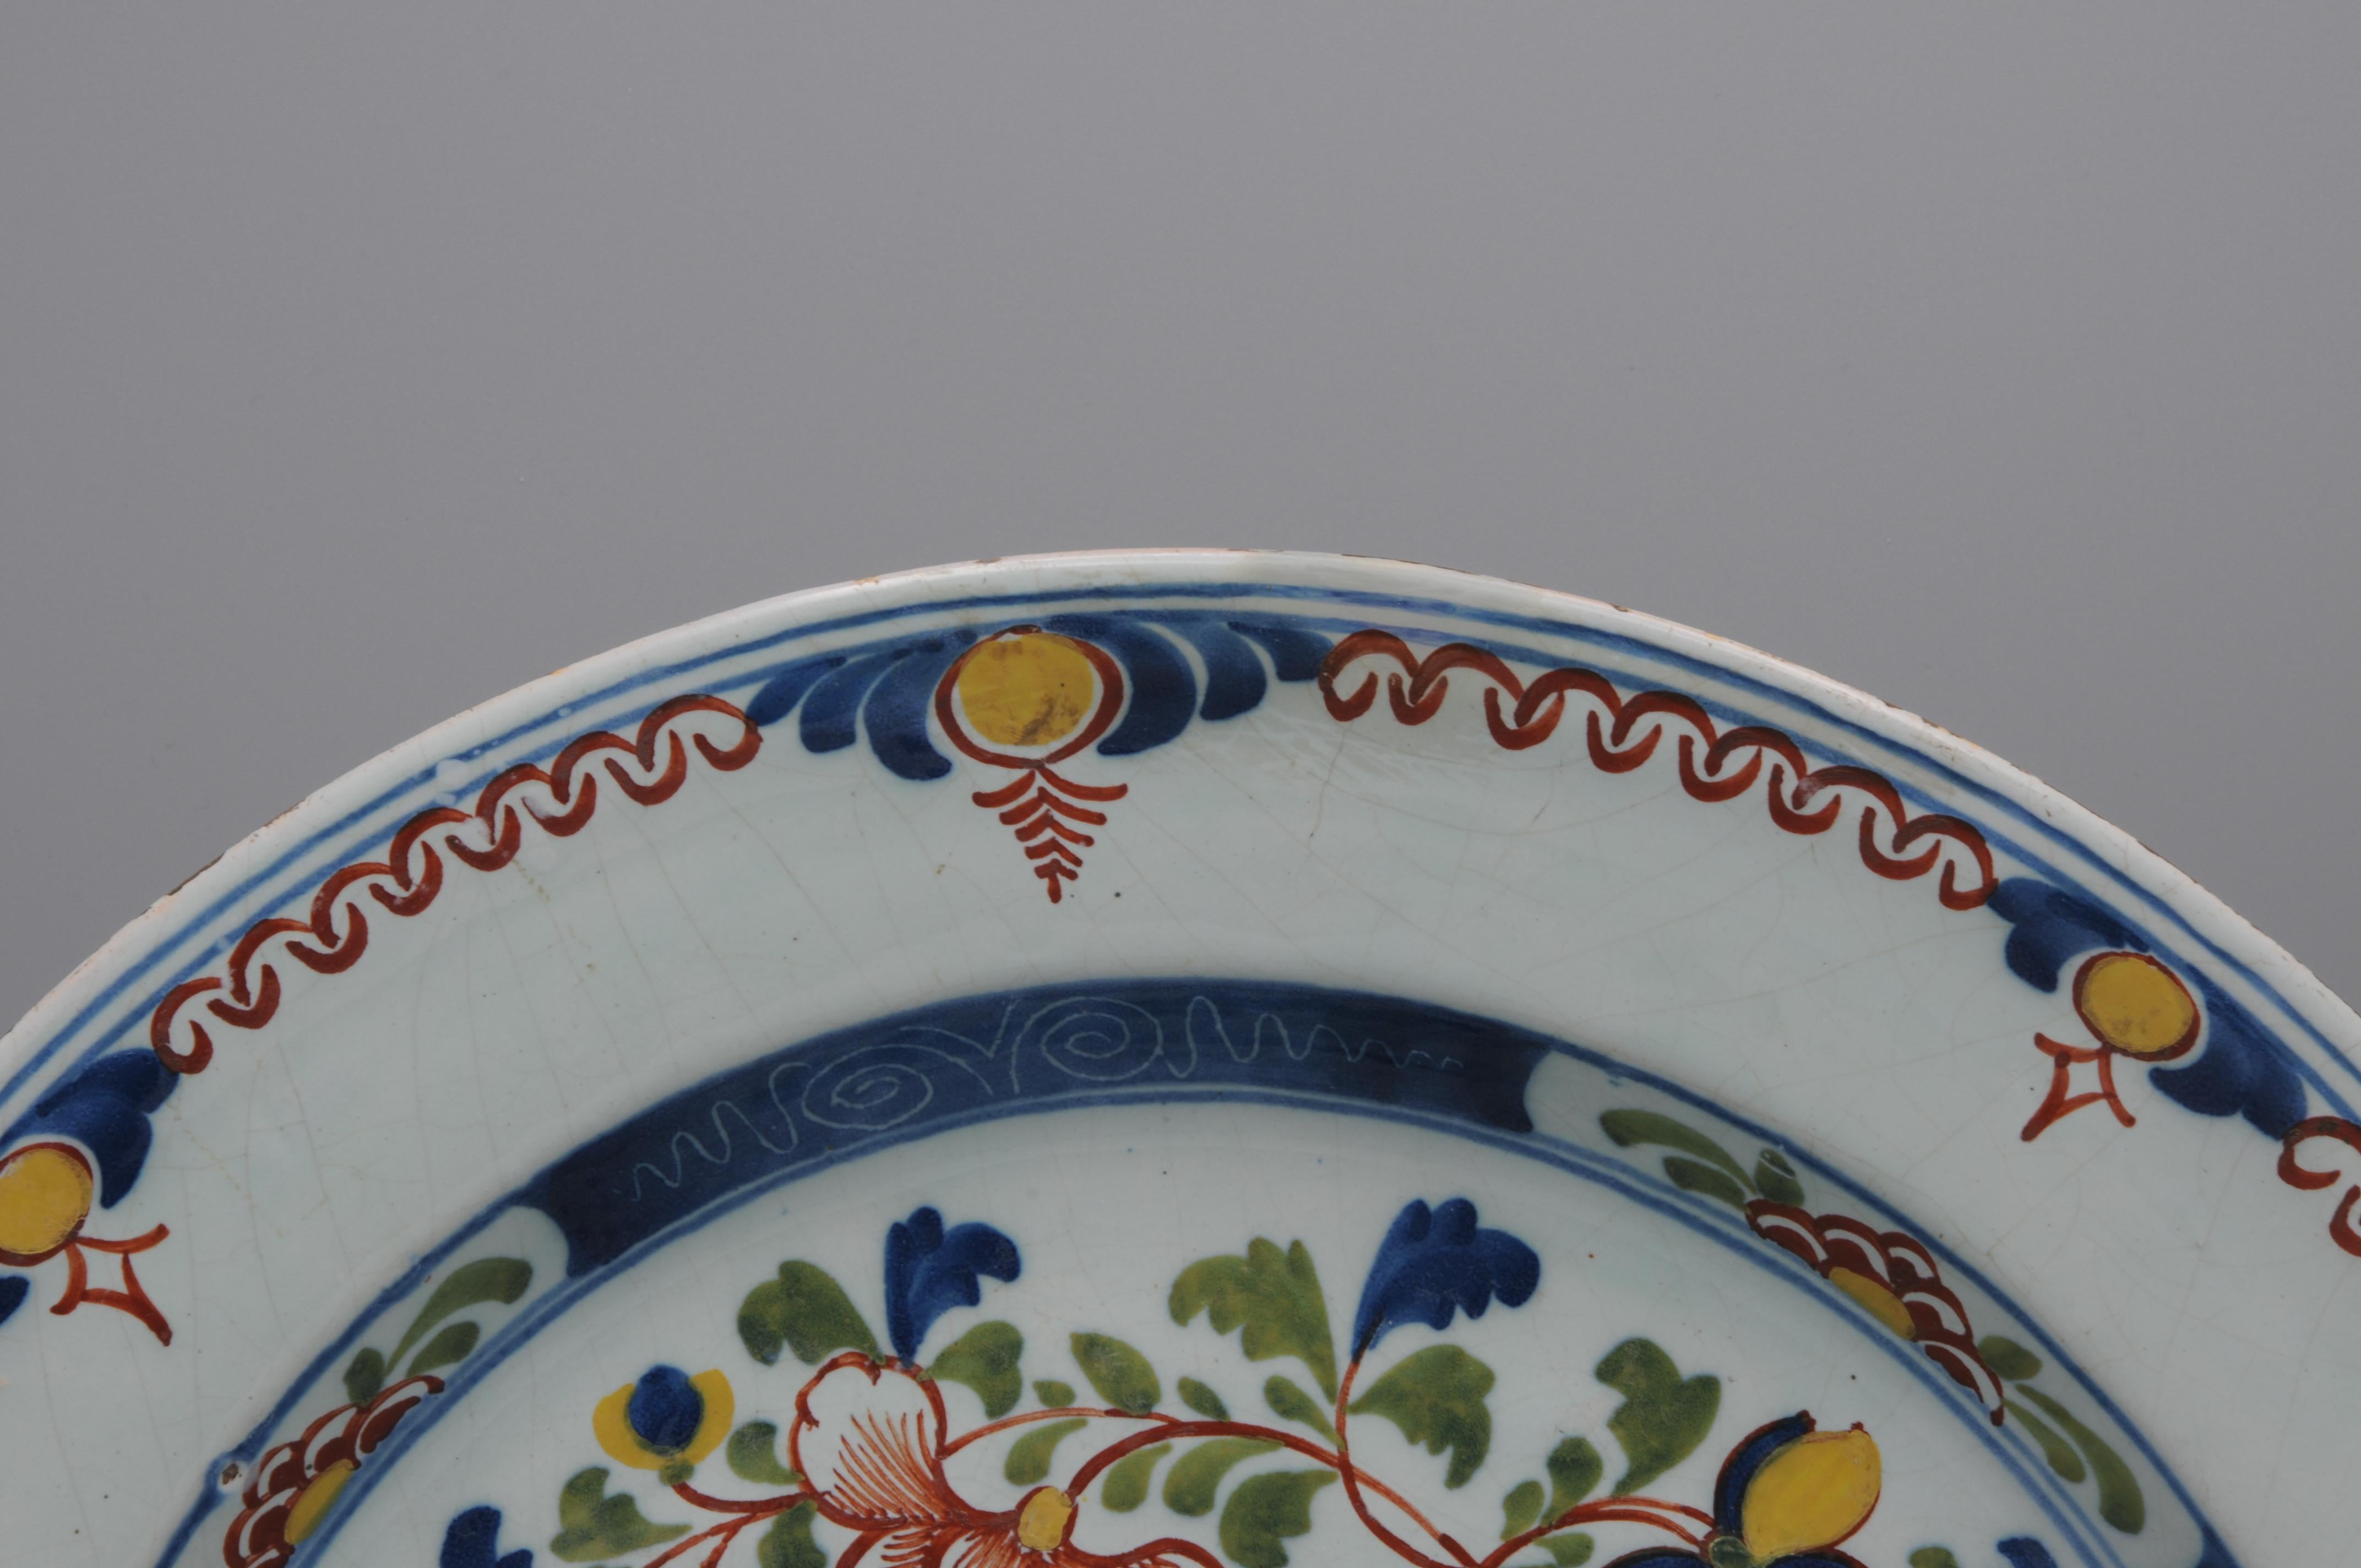 Glazed Delft - Polychrome Chinoiserie Charger For Sale